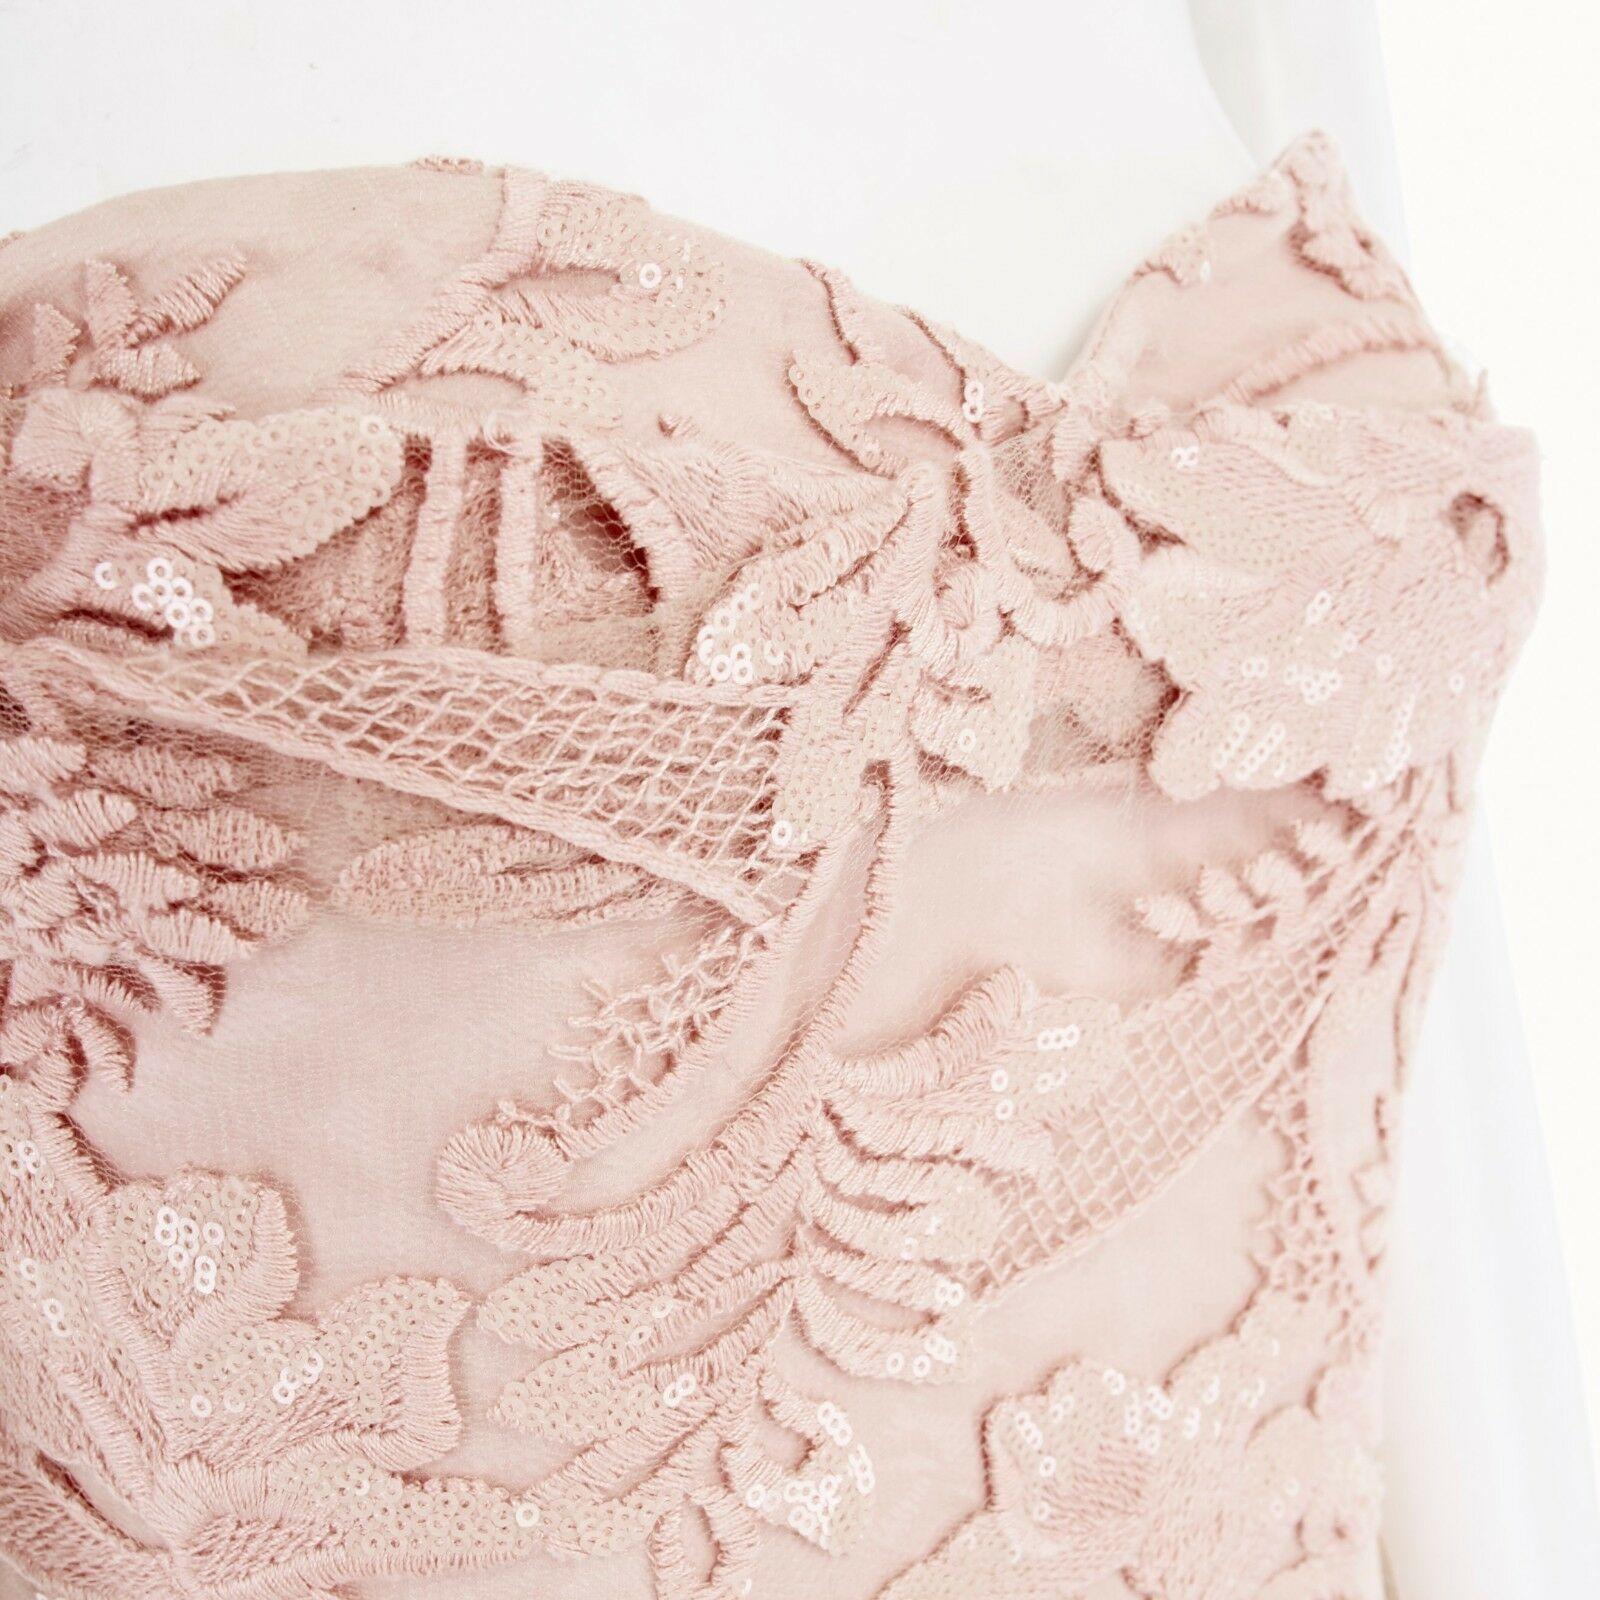 new MARCHESA NOTTE nude pink sequins embroidery lace belted gown dress US6 M

MARCHESA NOTTE
FROM THE PRE-FALL 2015 COLLECTION
Polyester, spandex, elastane . Nude pink . Floral embroidery on tulle . Tonal sequins embellished on various floral